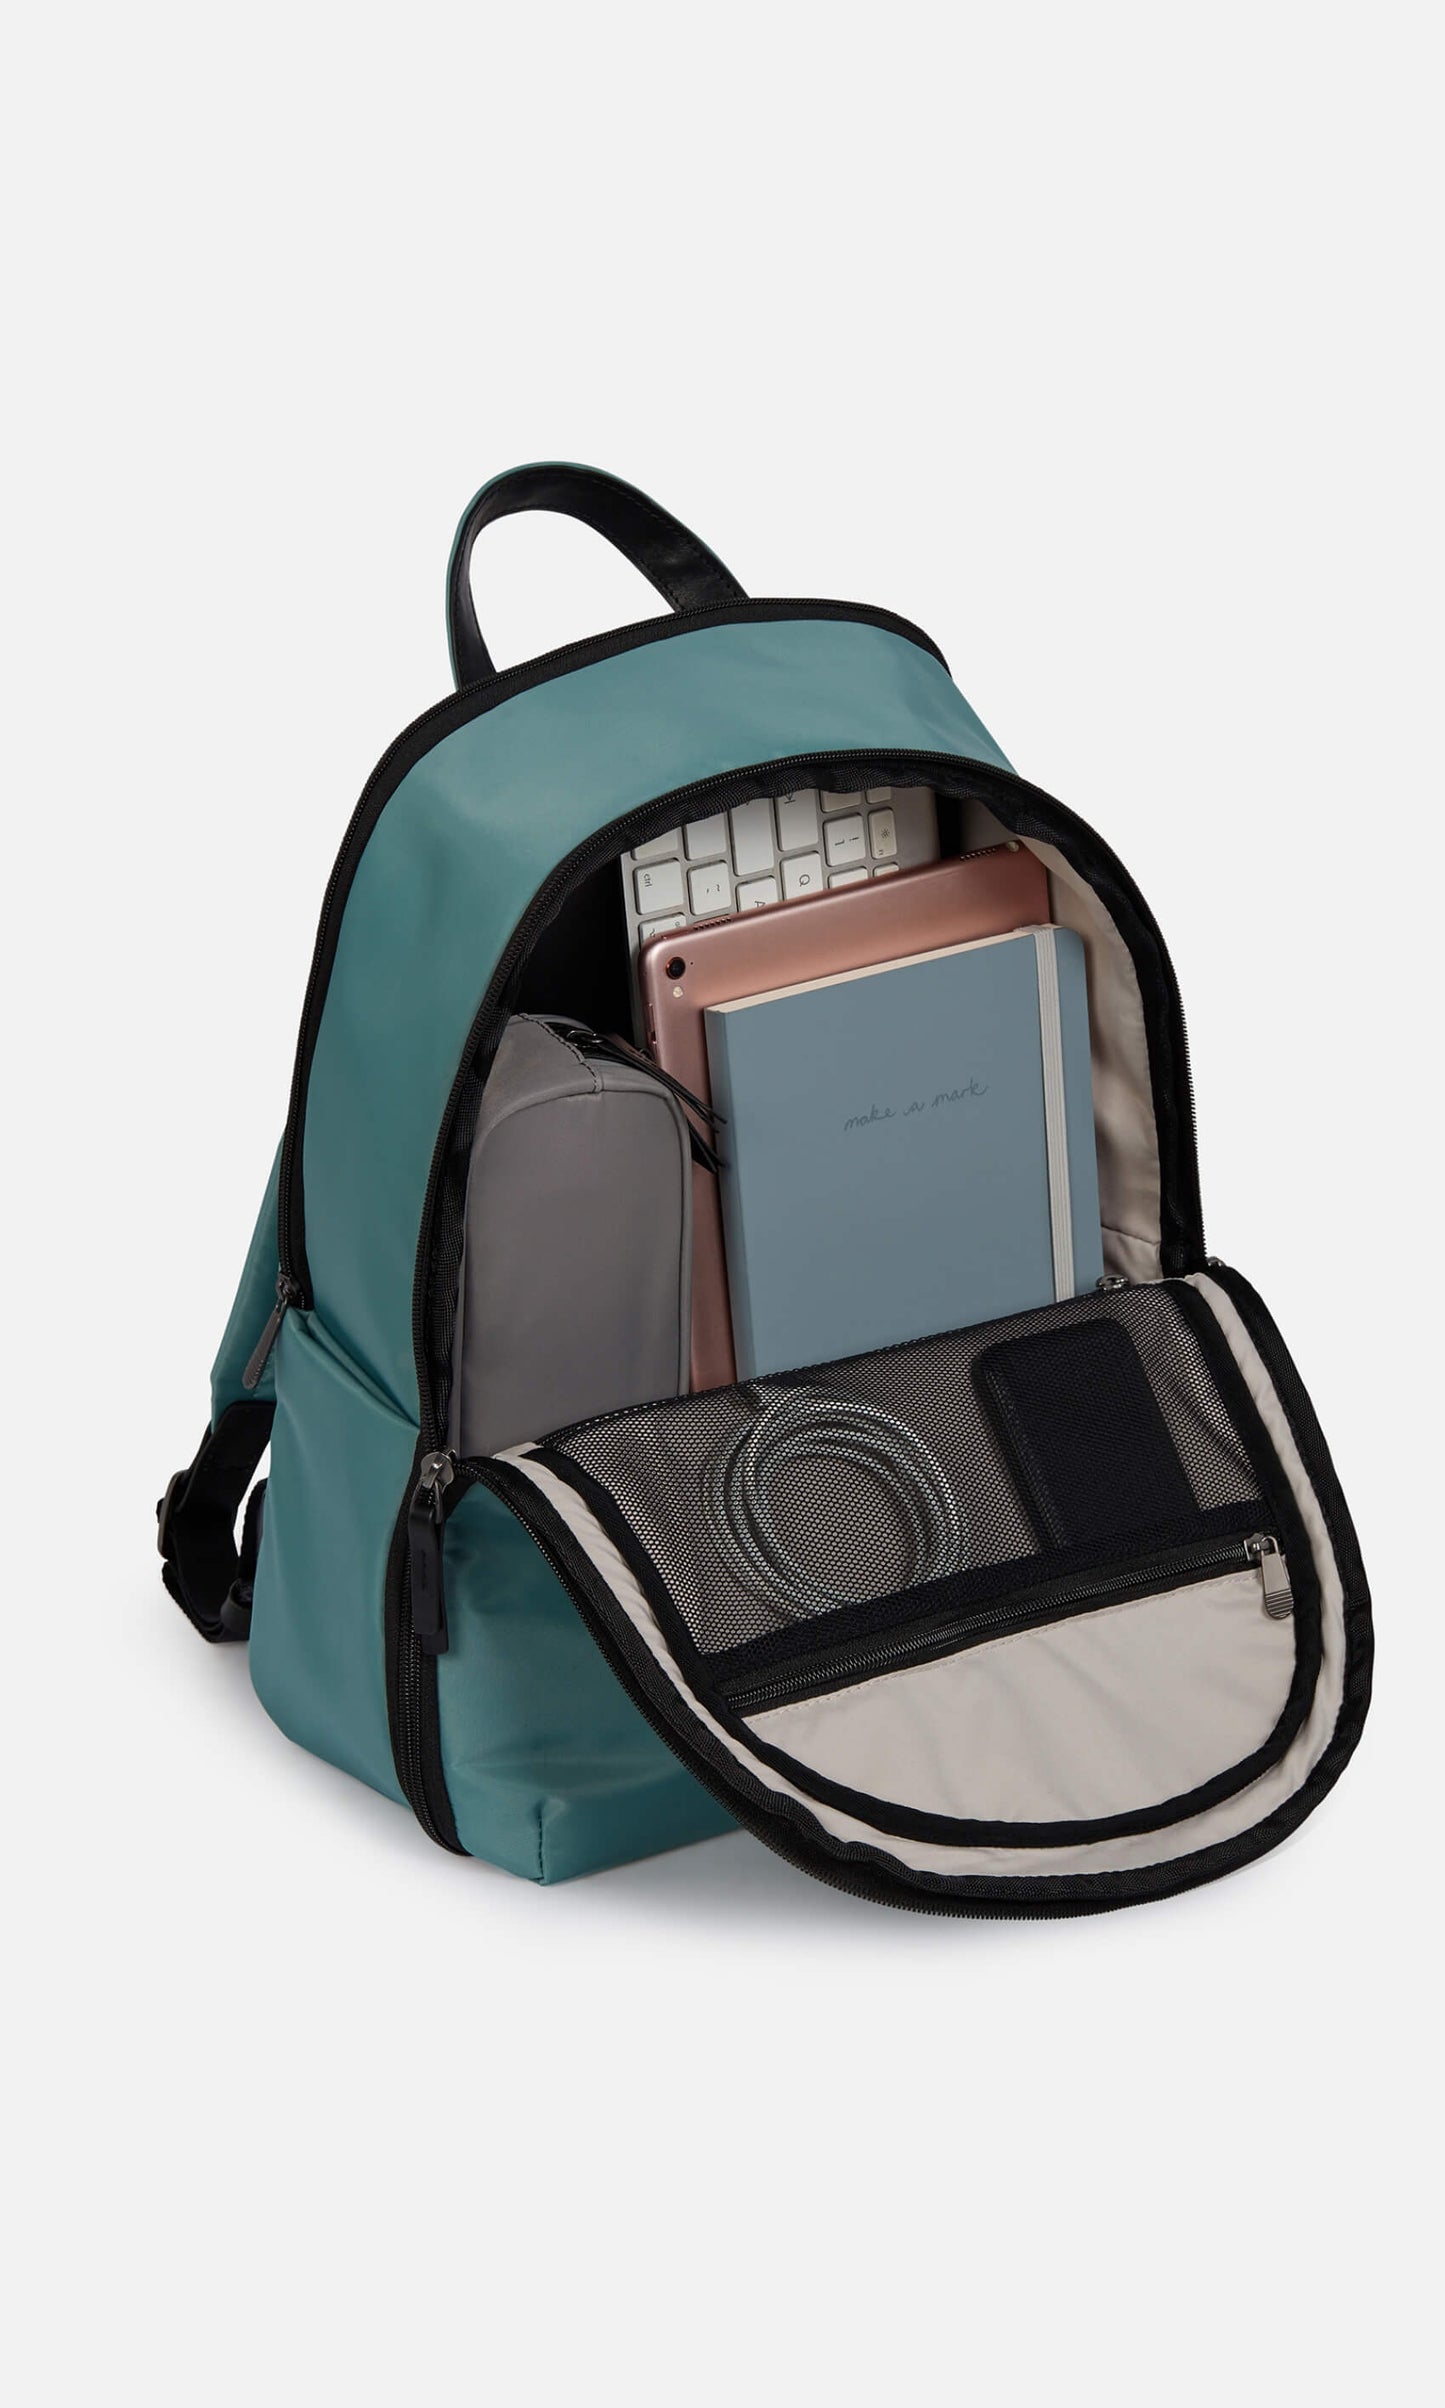 Chelsea Backpack in Mineral